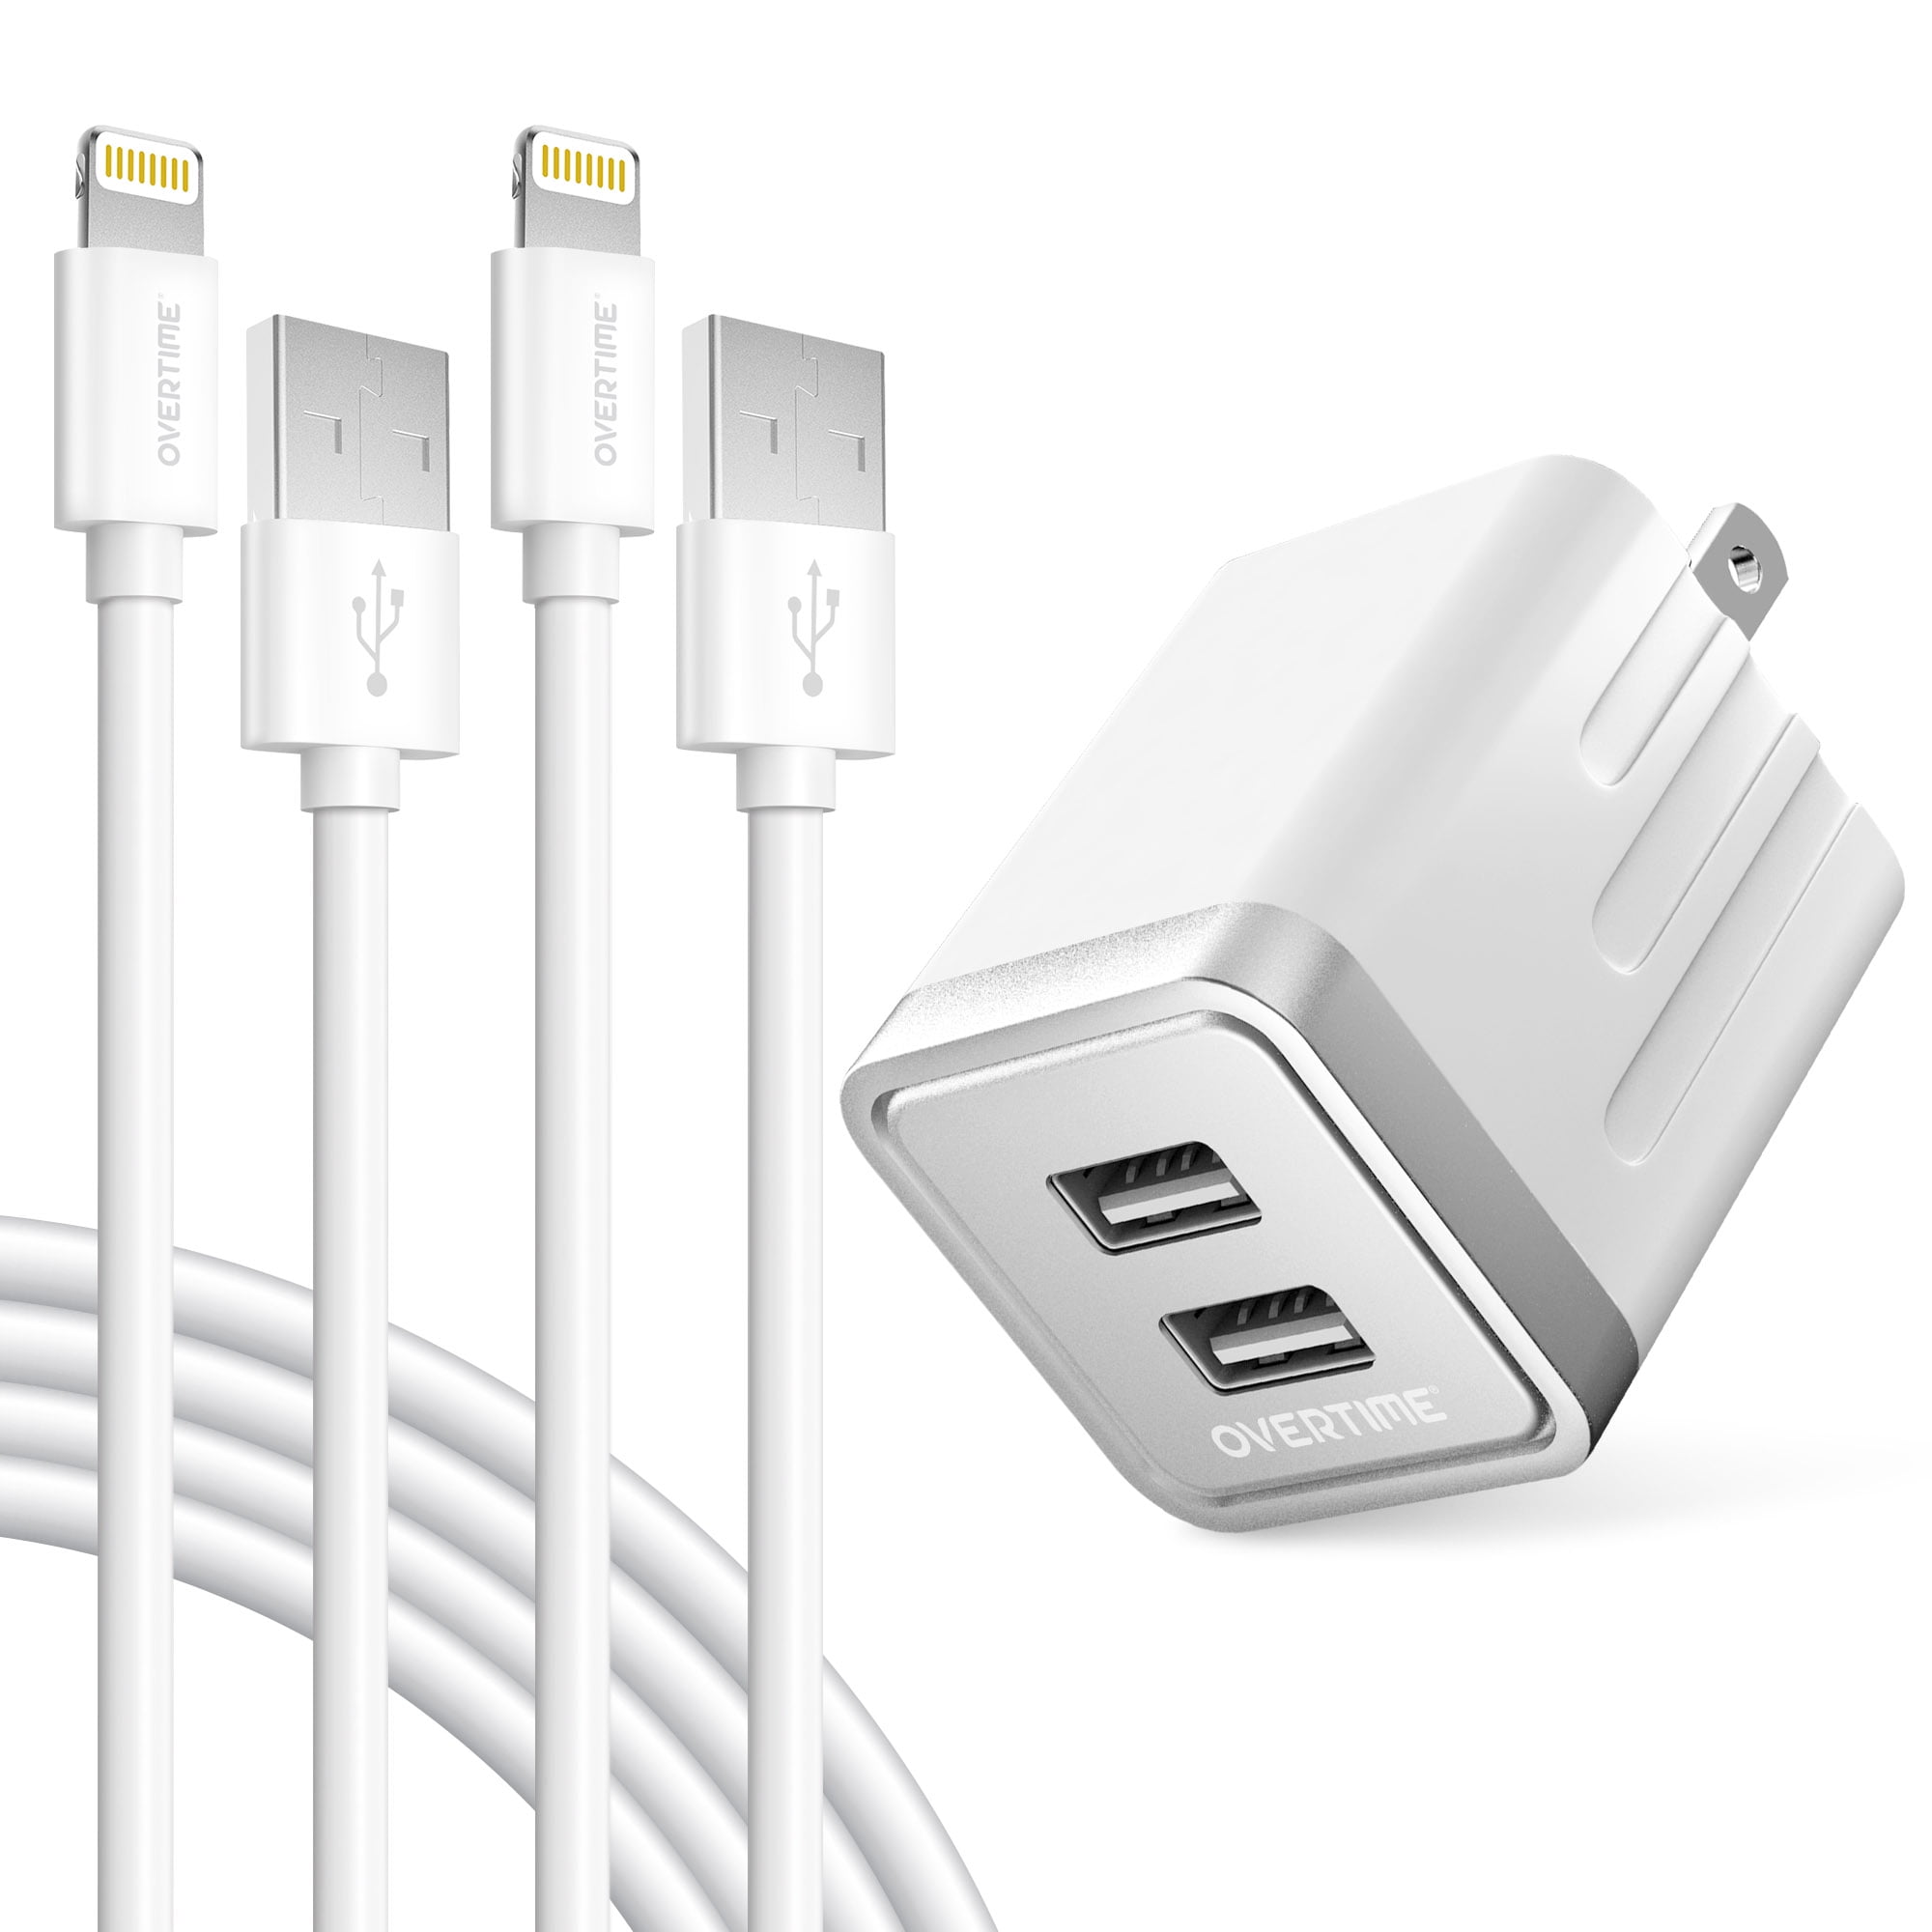 TAKAGI Fast Charging Lightning Cable High Speed Data Sync Transfer 6feet Cord With Wall Charger Plug 2 Sets Compatible With iPhone XS MAX/XR/X/8/7/Plus/6S/6/SE/5S/iPad iPhone Charger ETL Listed 